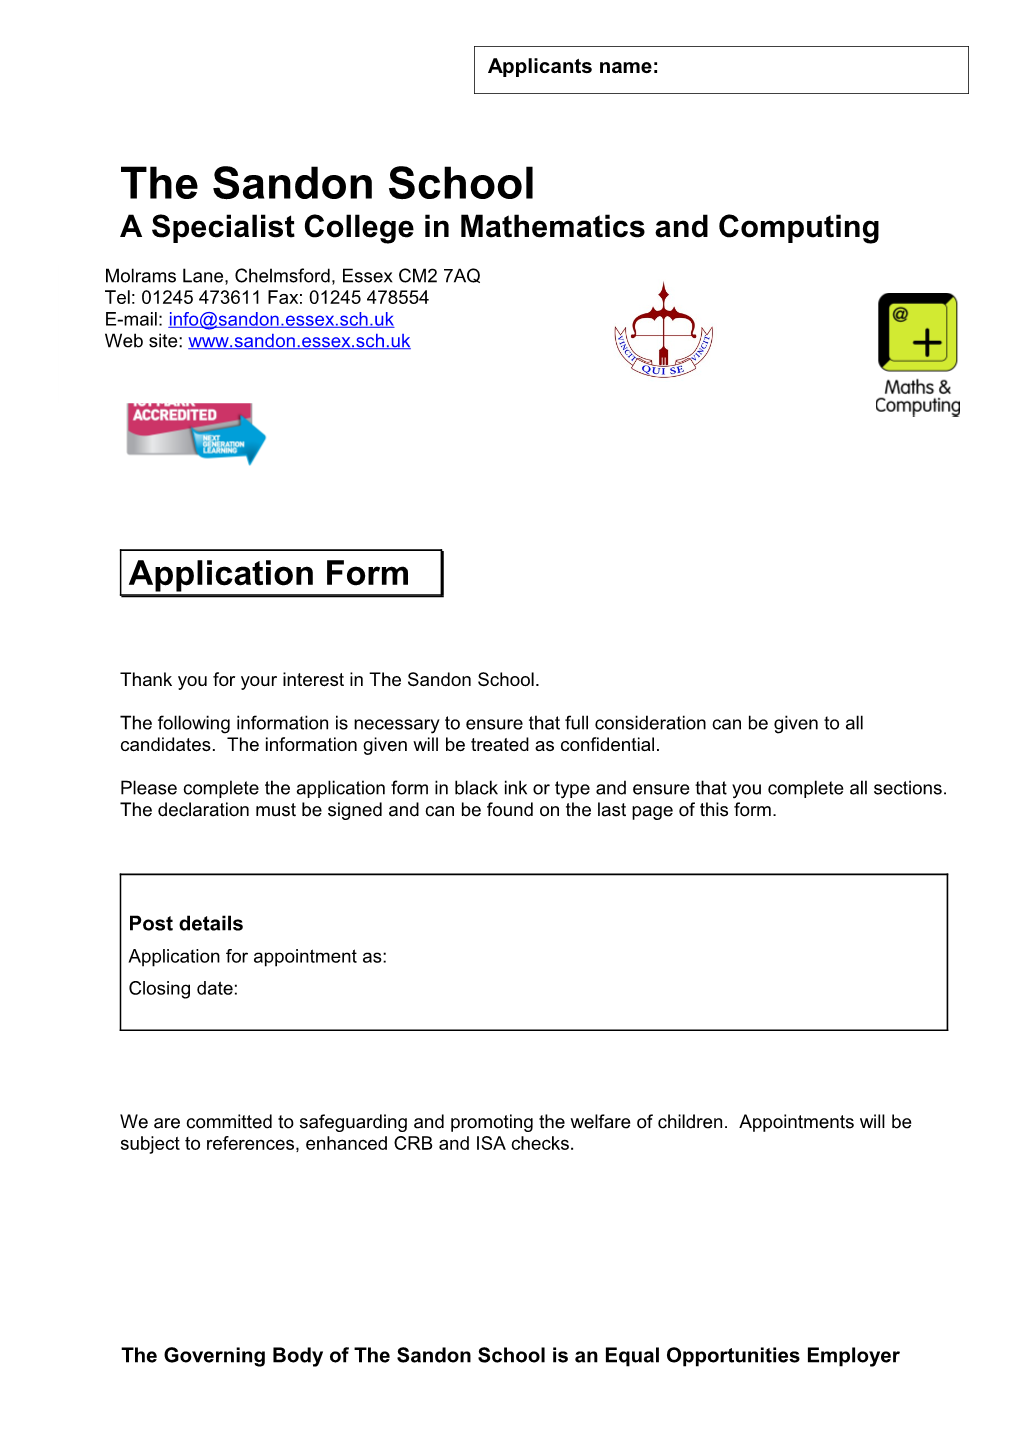 A Specialistcollege in Mathematics and Computing